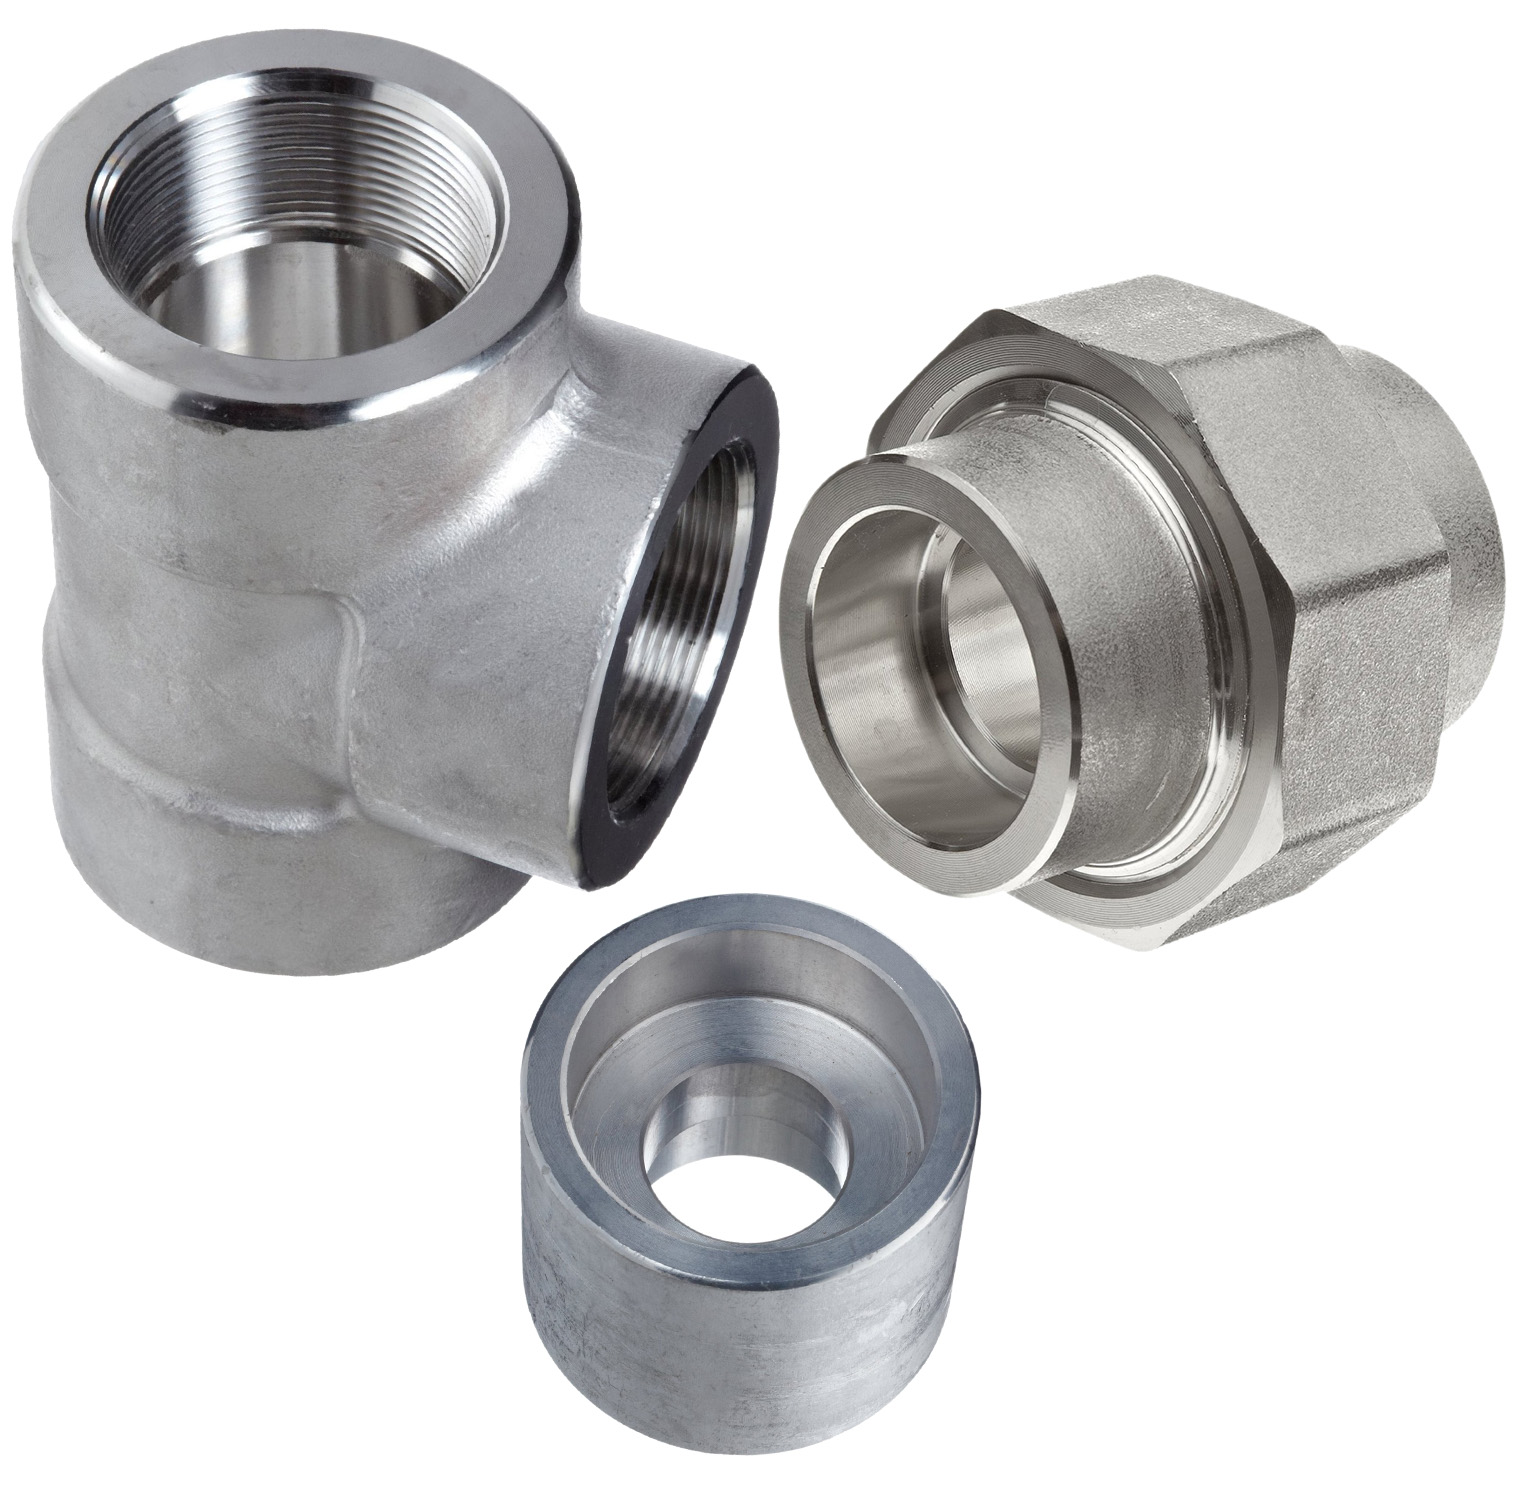 316 SS New 1-1/4" npt Forged Stainless Steel 90° Elbow Pipe Fitting 3000 psi 